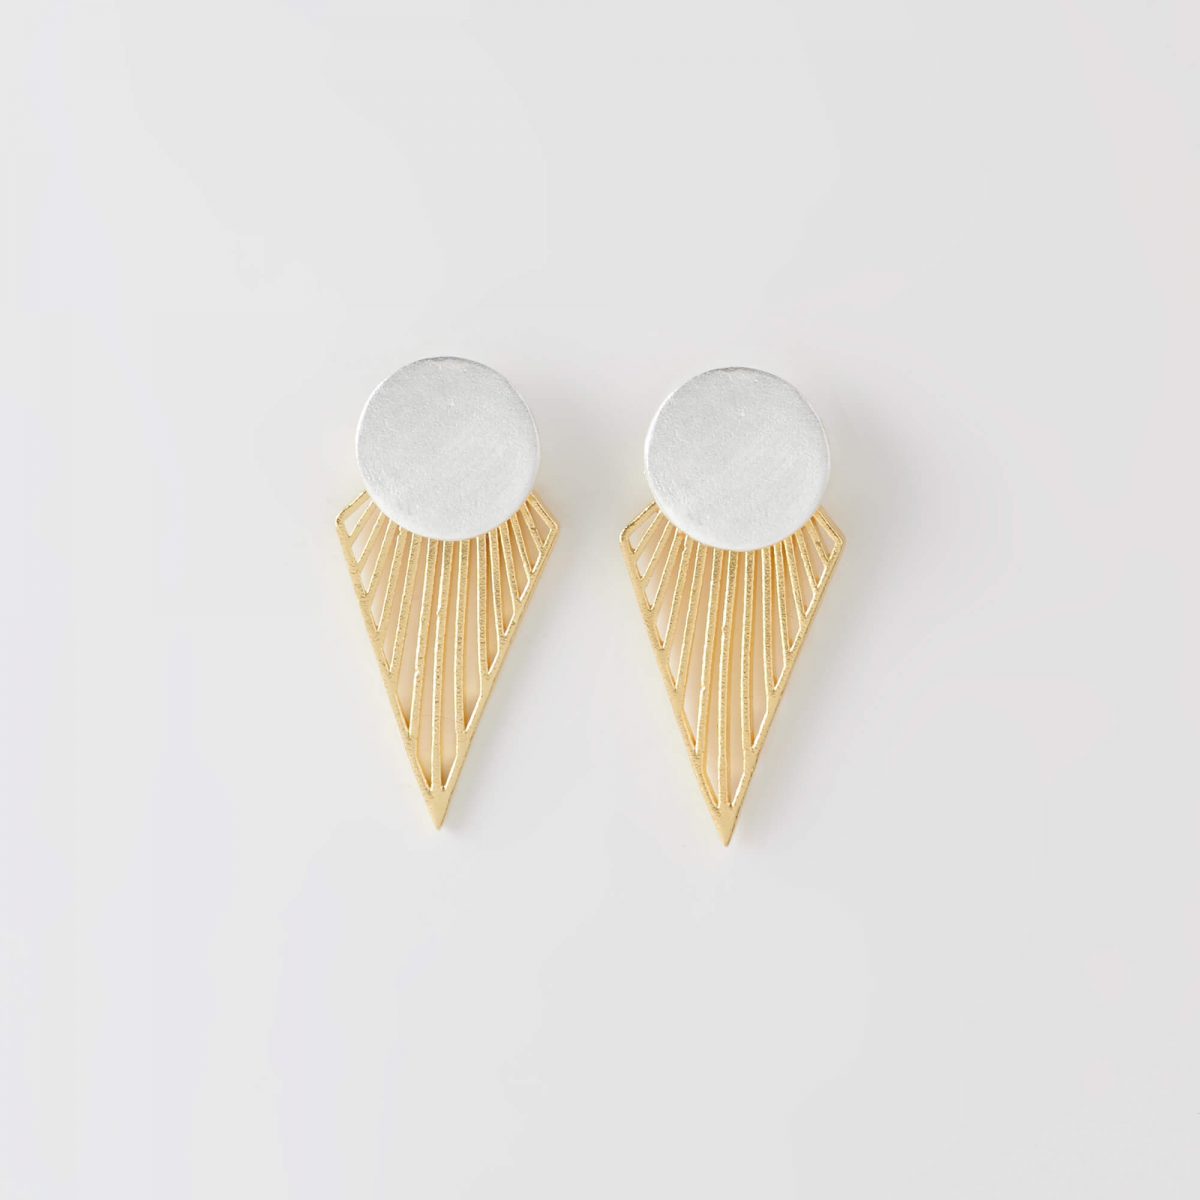 Sassy Earrings by Xoutou's